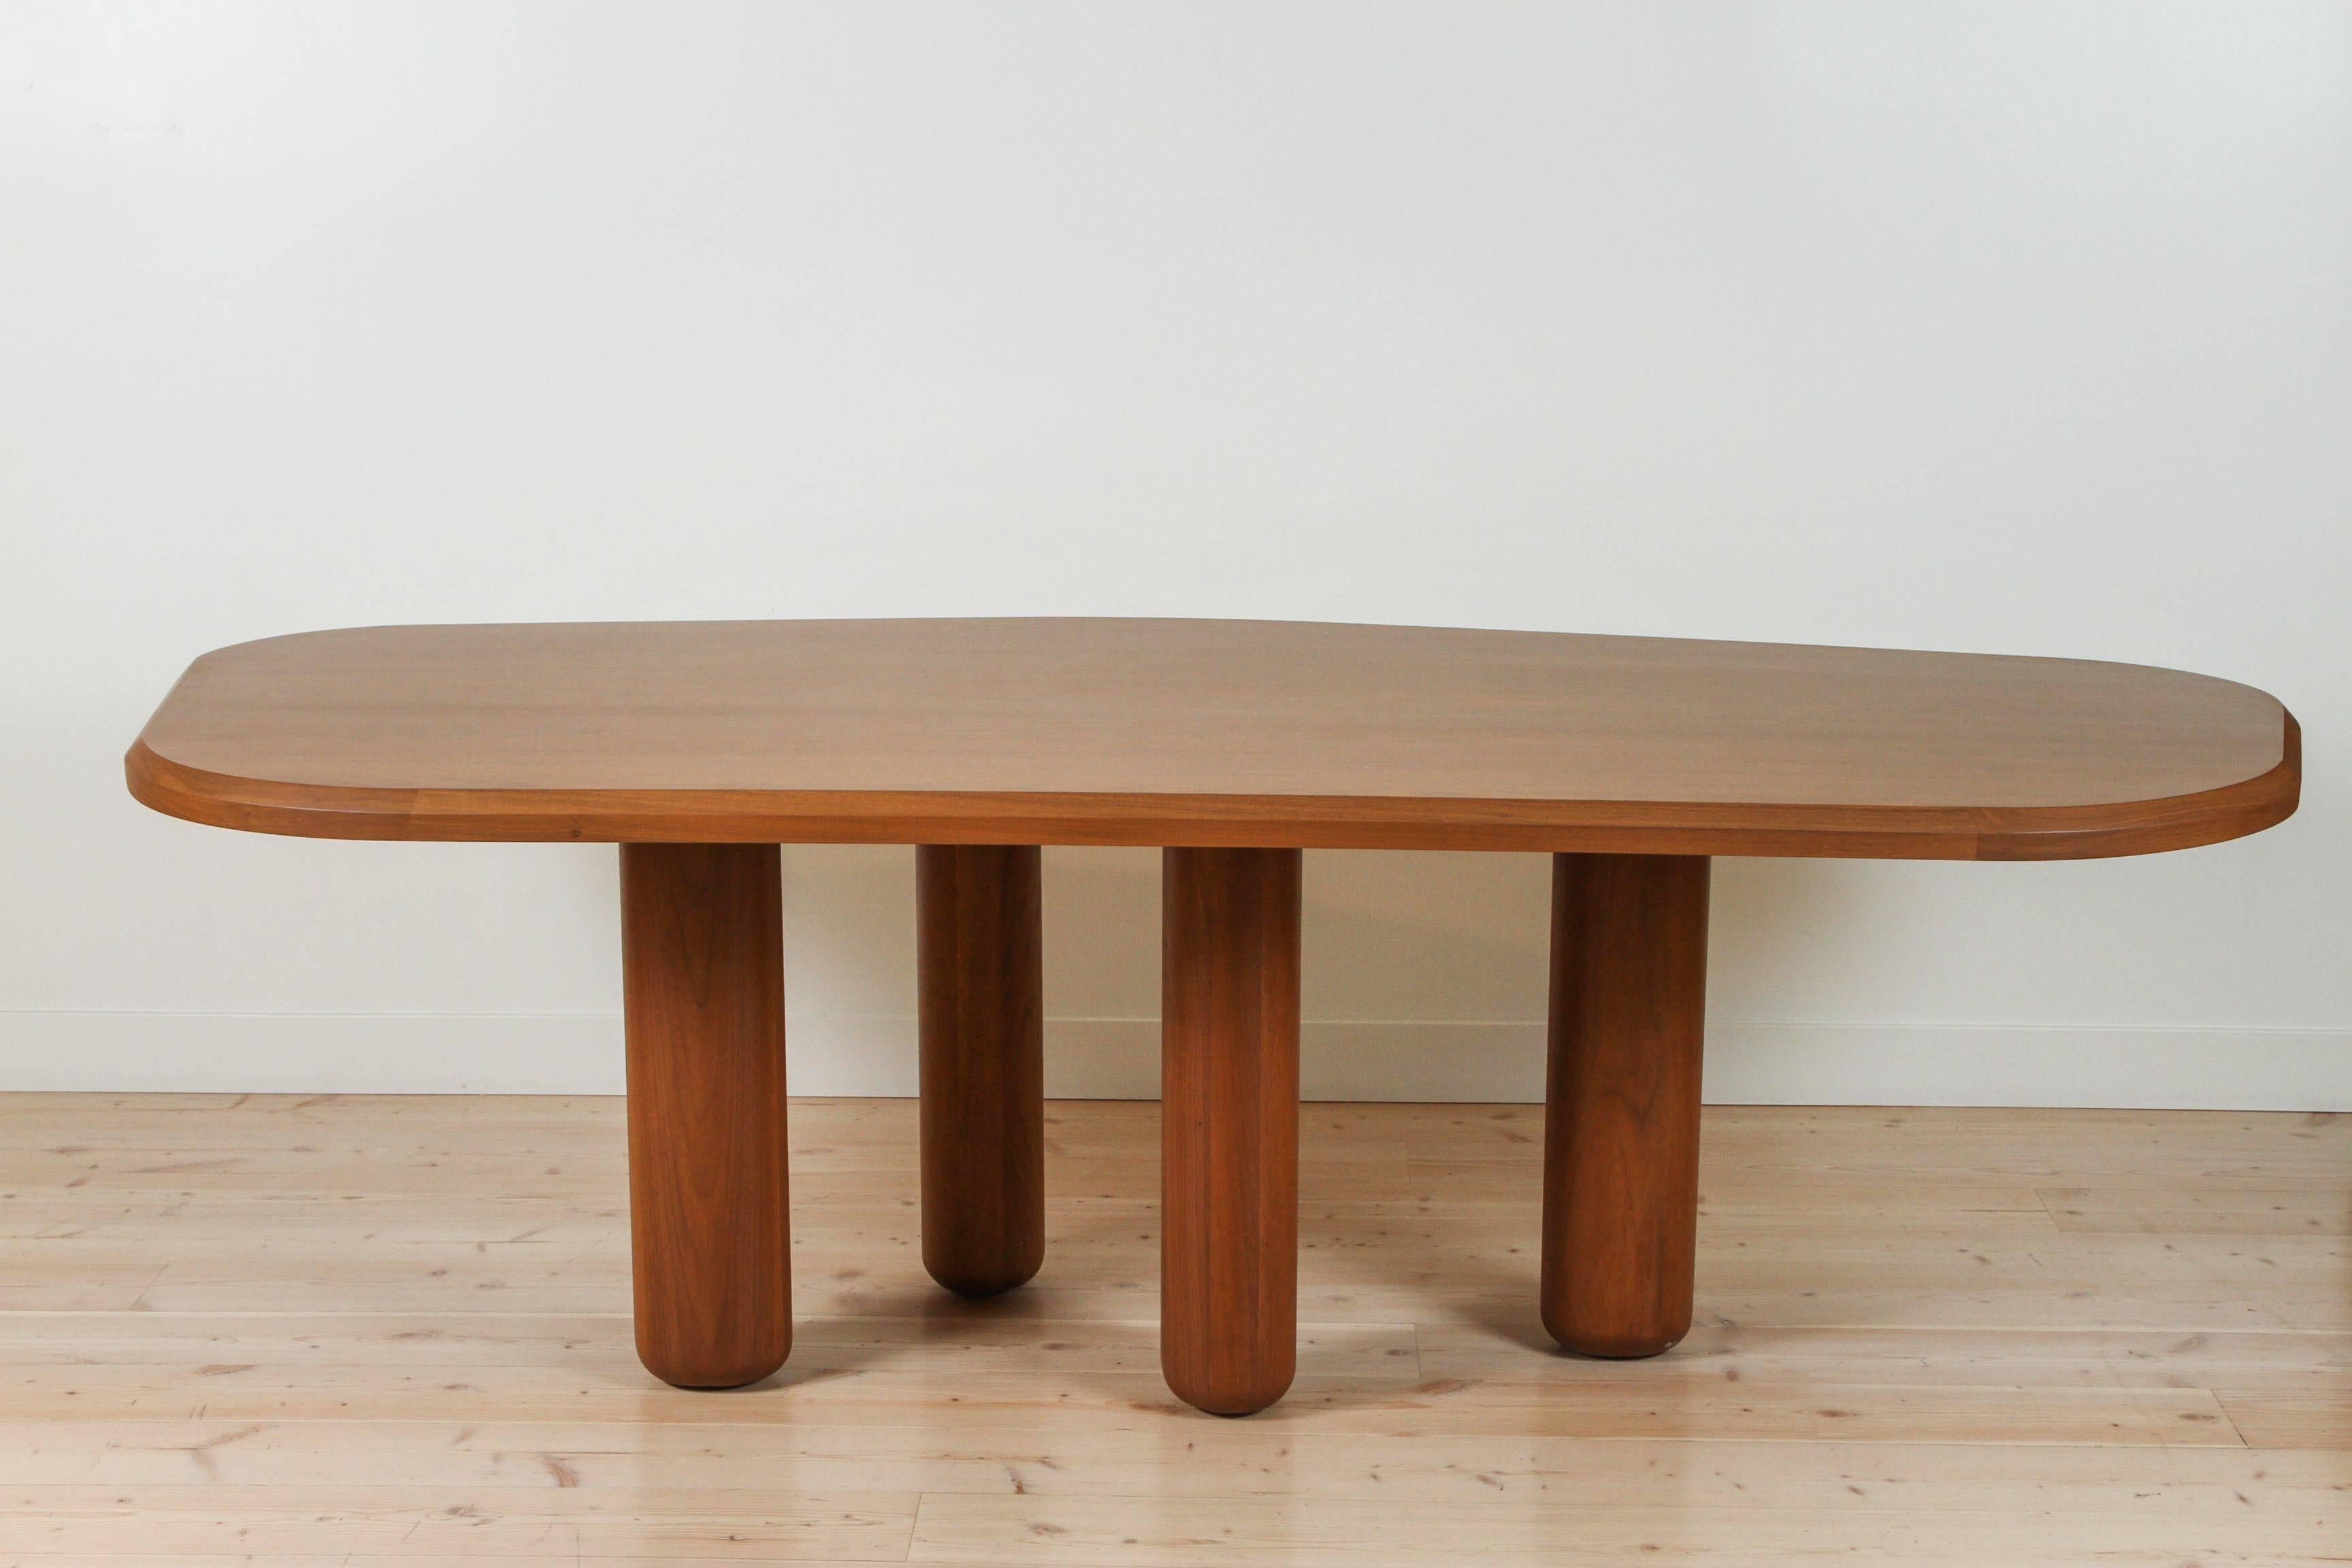 Contemporary Rough Dining Table by Collection Particulière for Lawson-Fenning